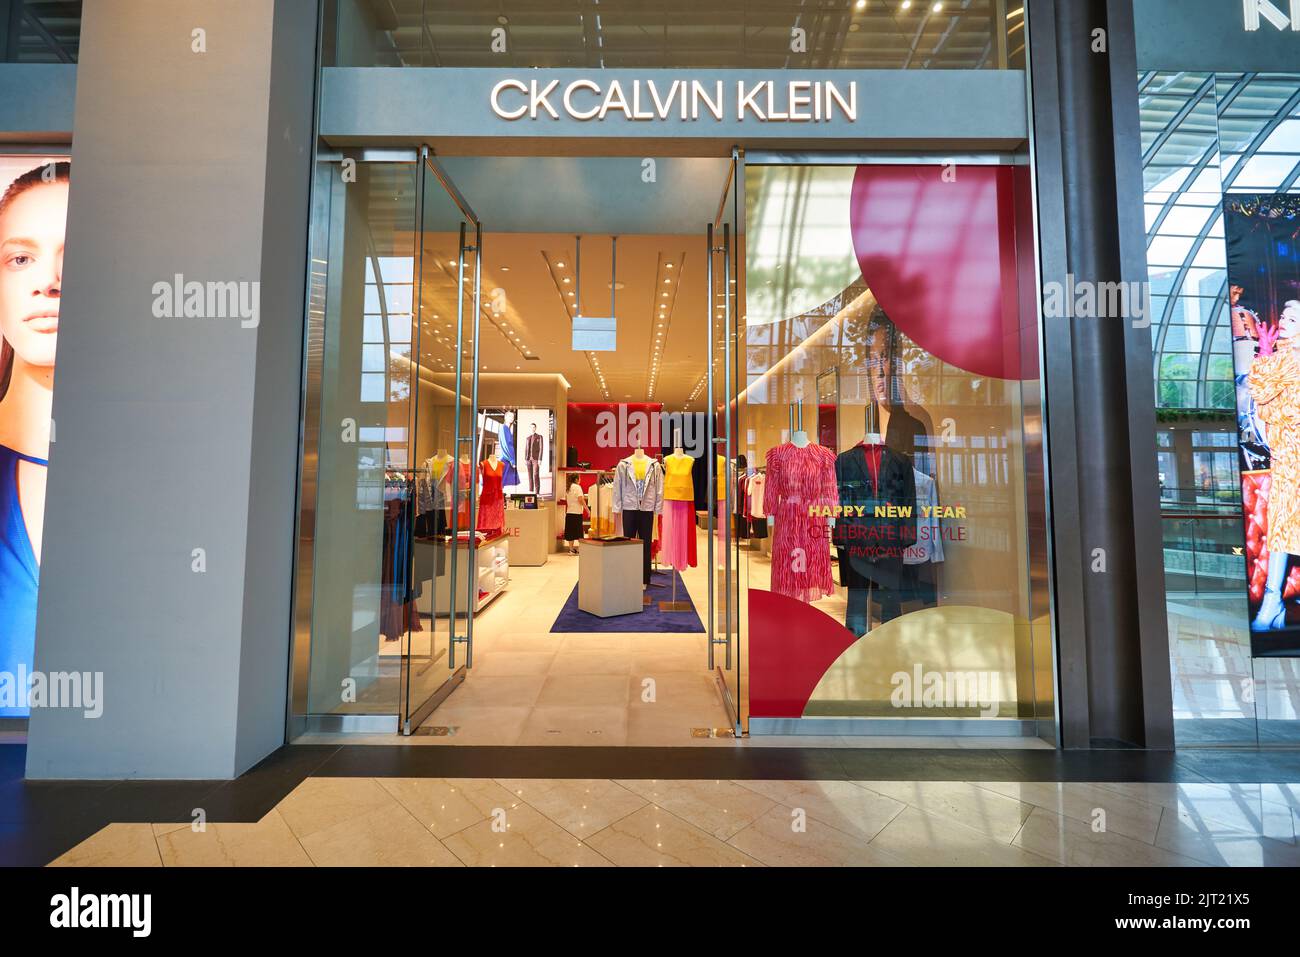 SINGAPORE - JANUARY 20, 2020: entrance to Calvin Klein store at the Shoppes at Marina Bay Sands in Singapore Stock Photo